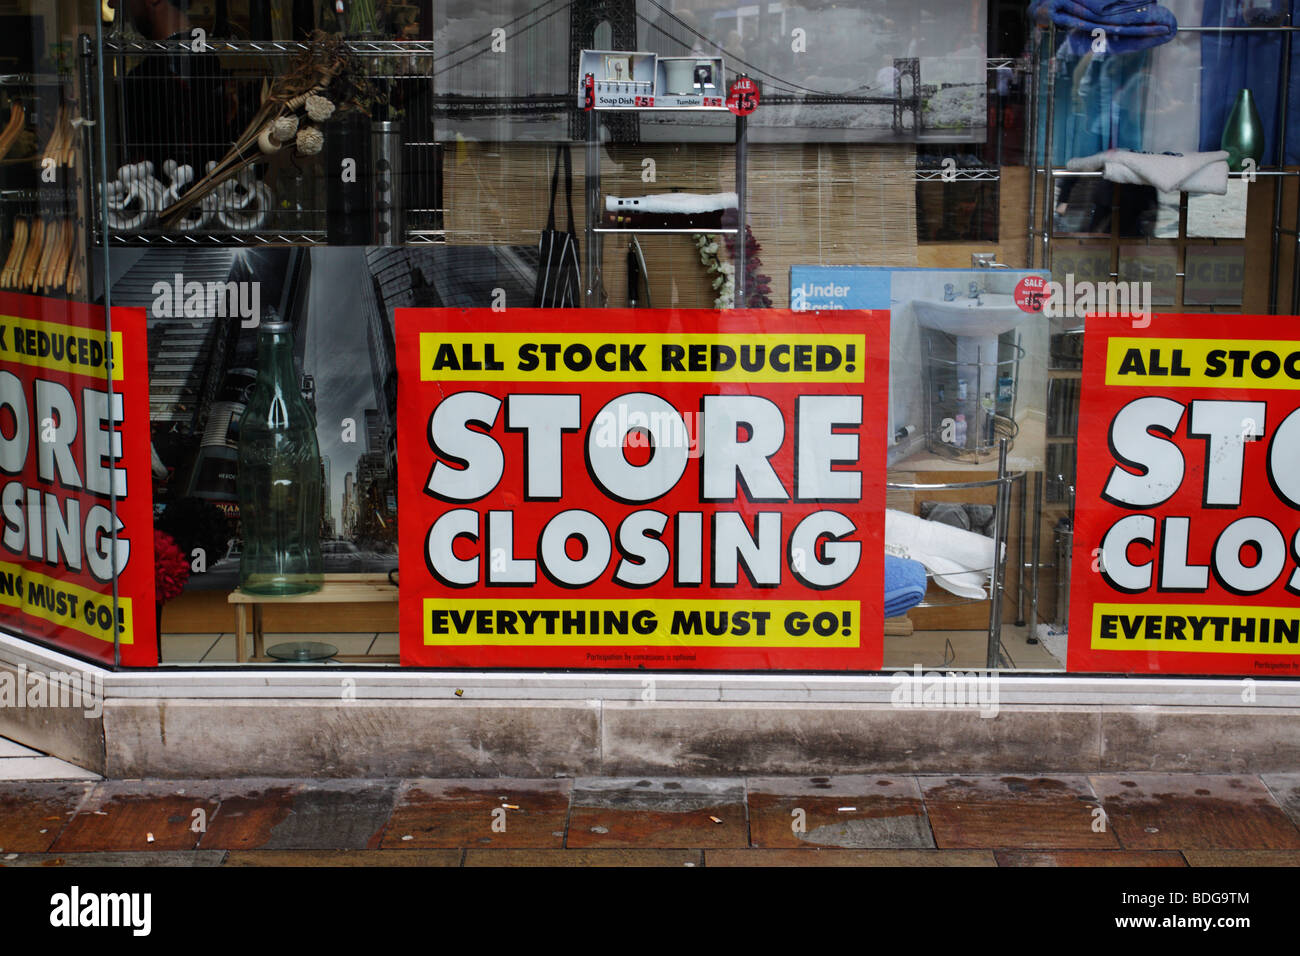 High street store closures during the 2009 recession Stock Photo